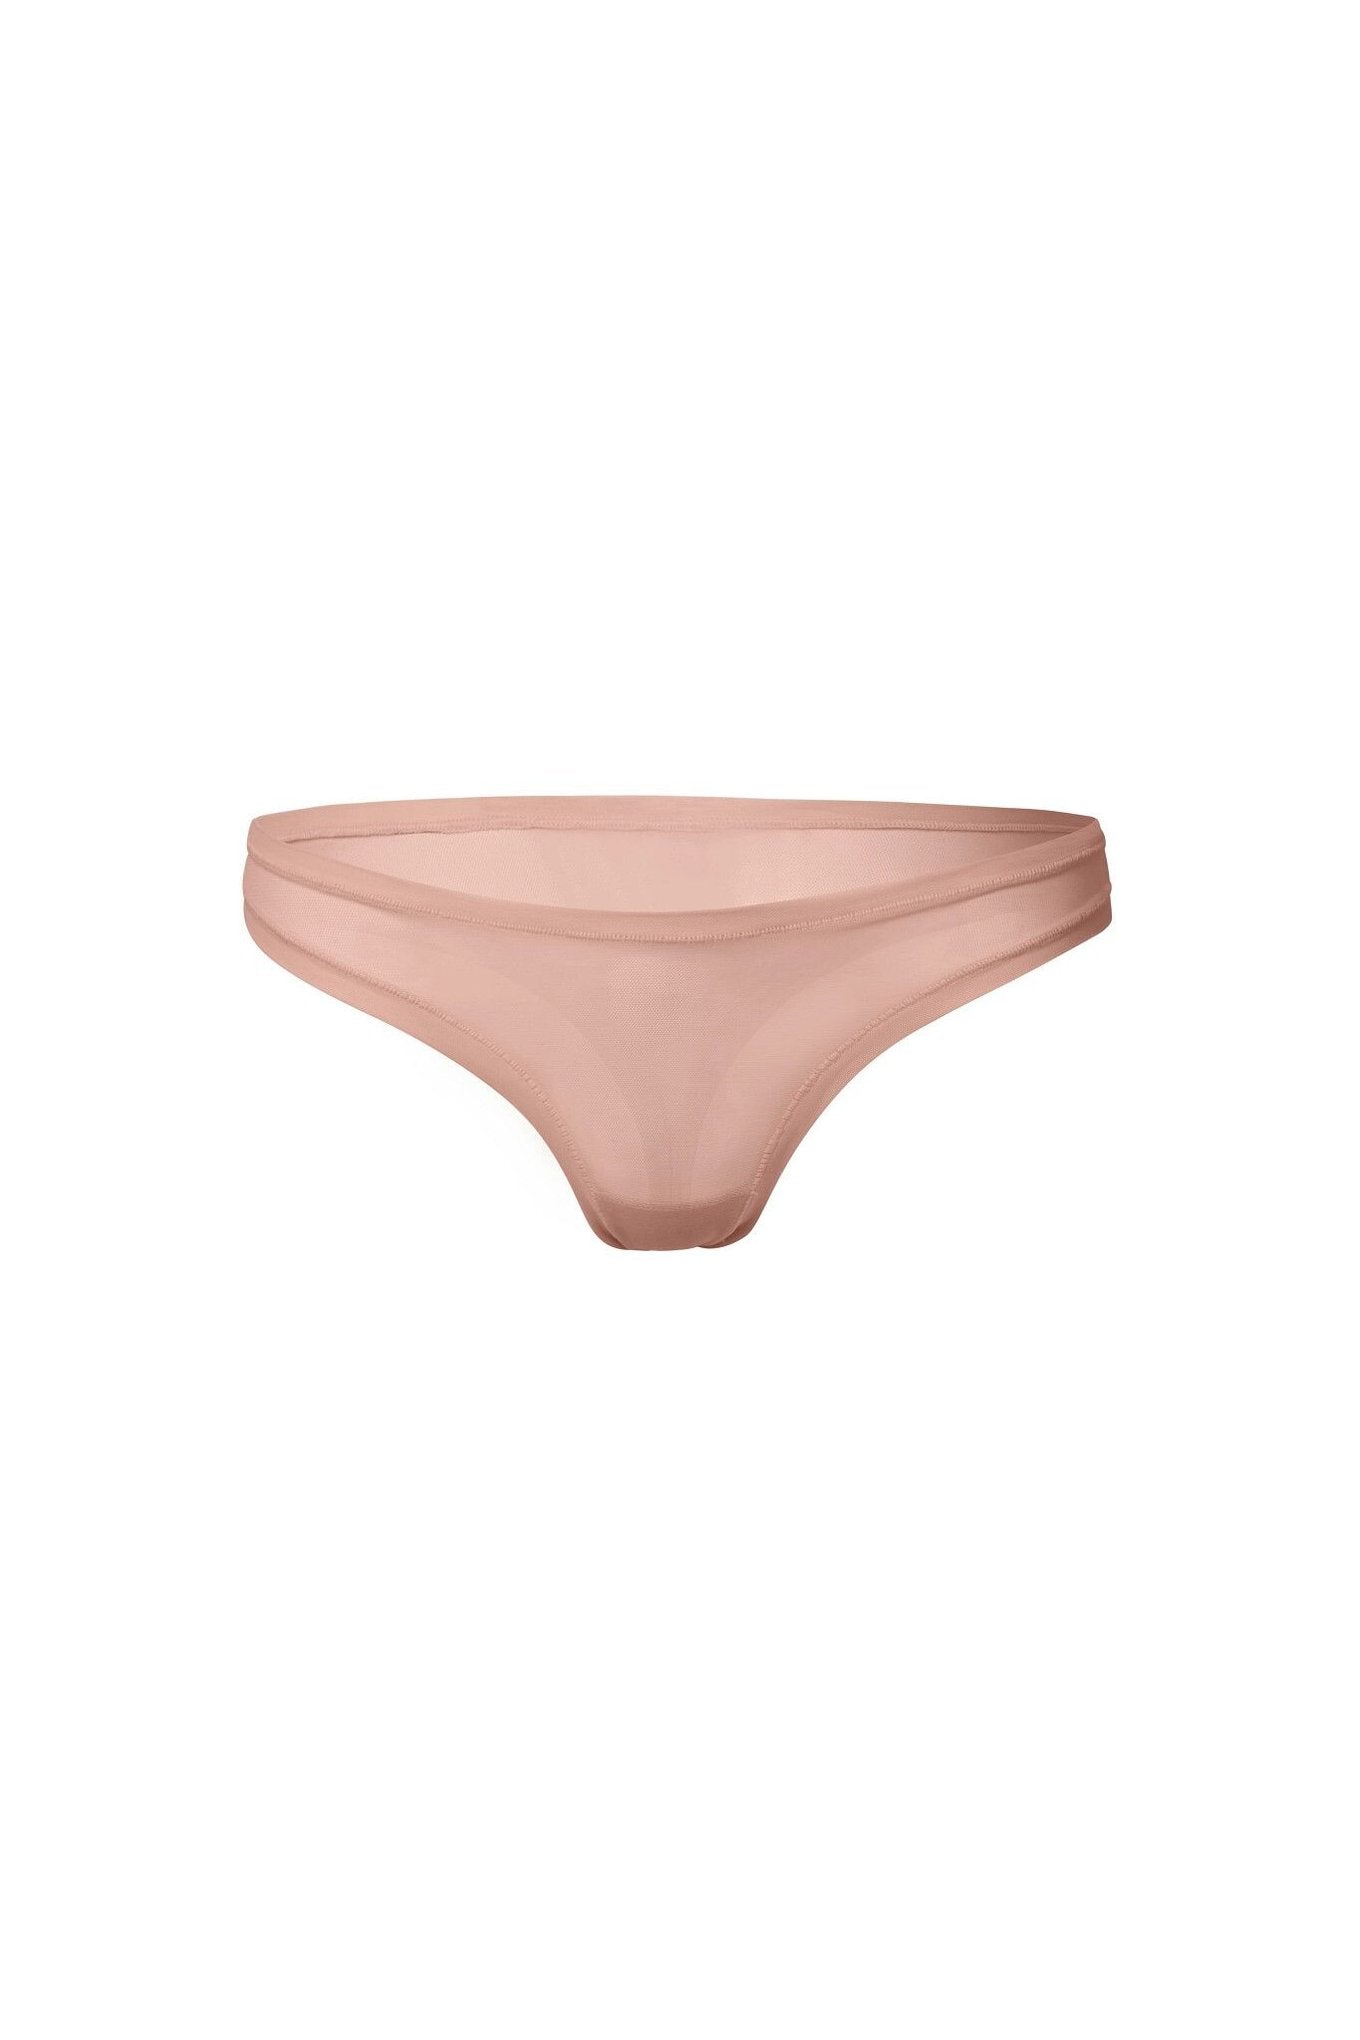 nueskin Bonnie Mesh Low-Rise Thong in color Rose Cloud and shape thong